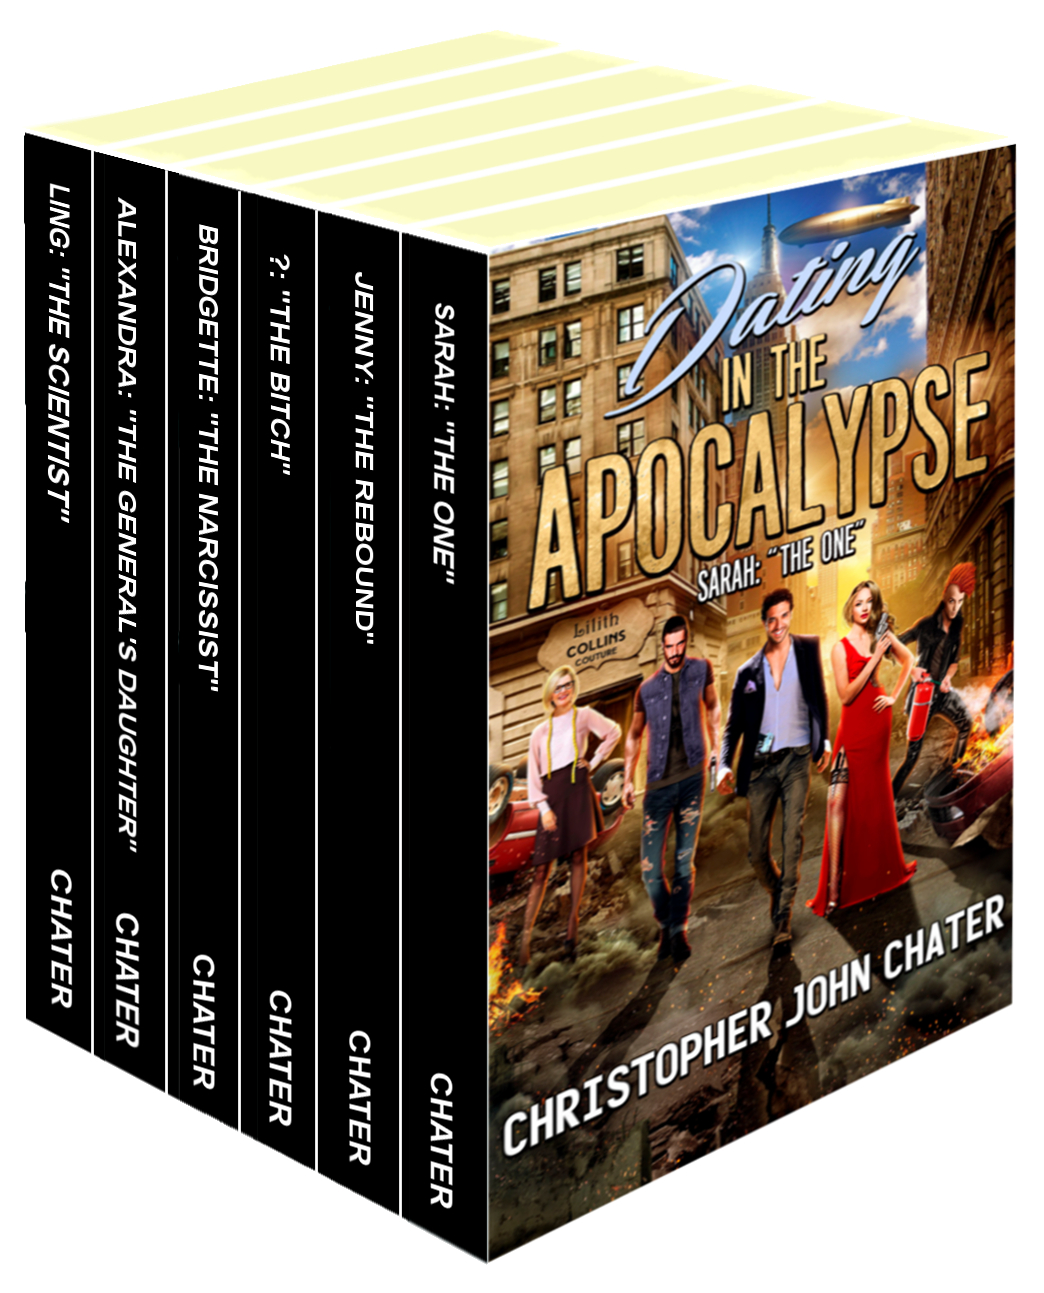 Dating in the Apocalypse: The Complete Series